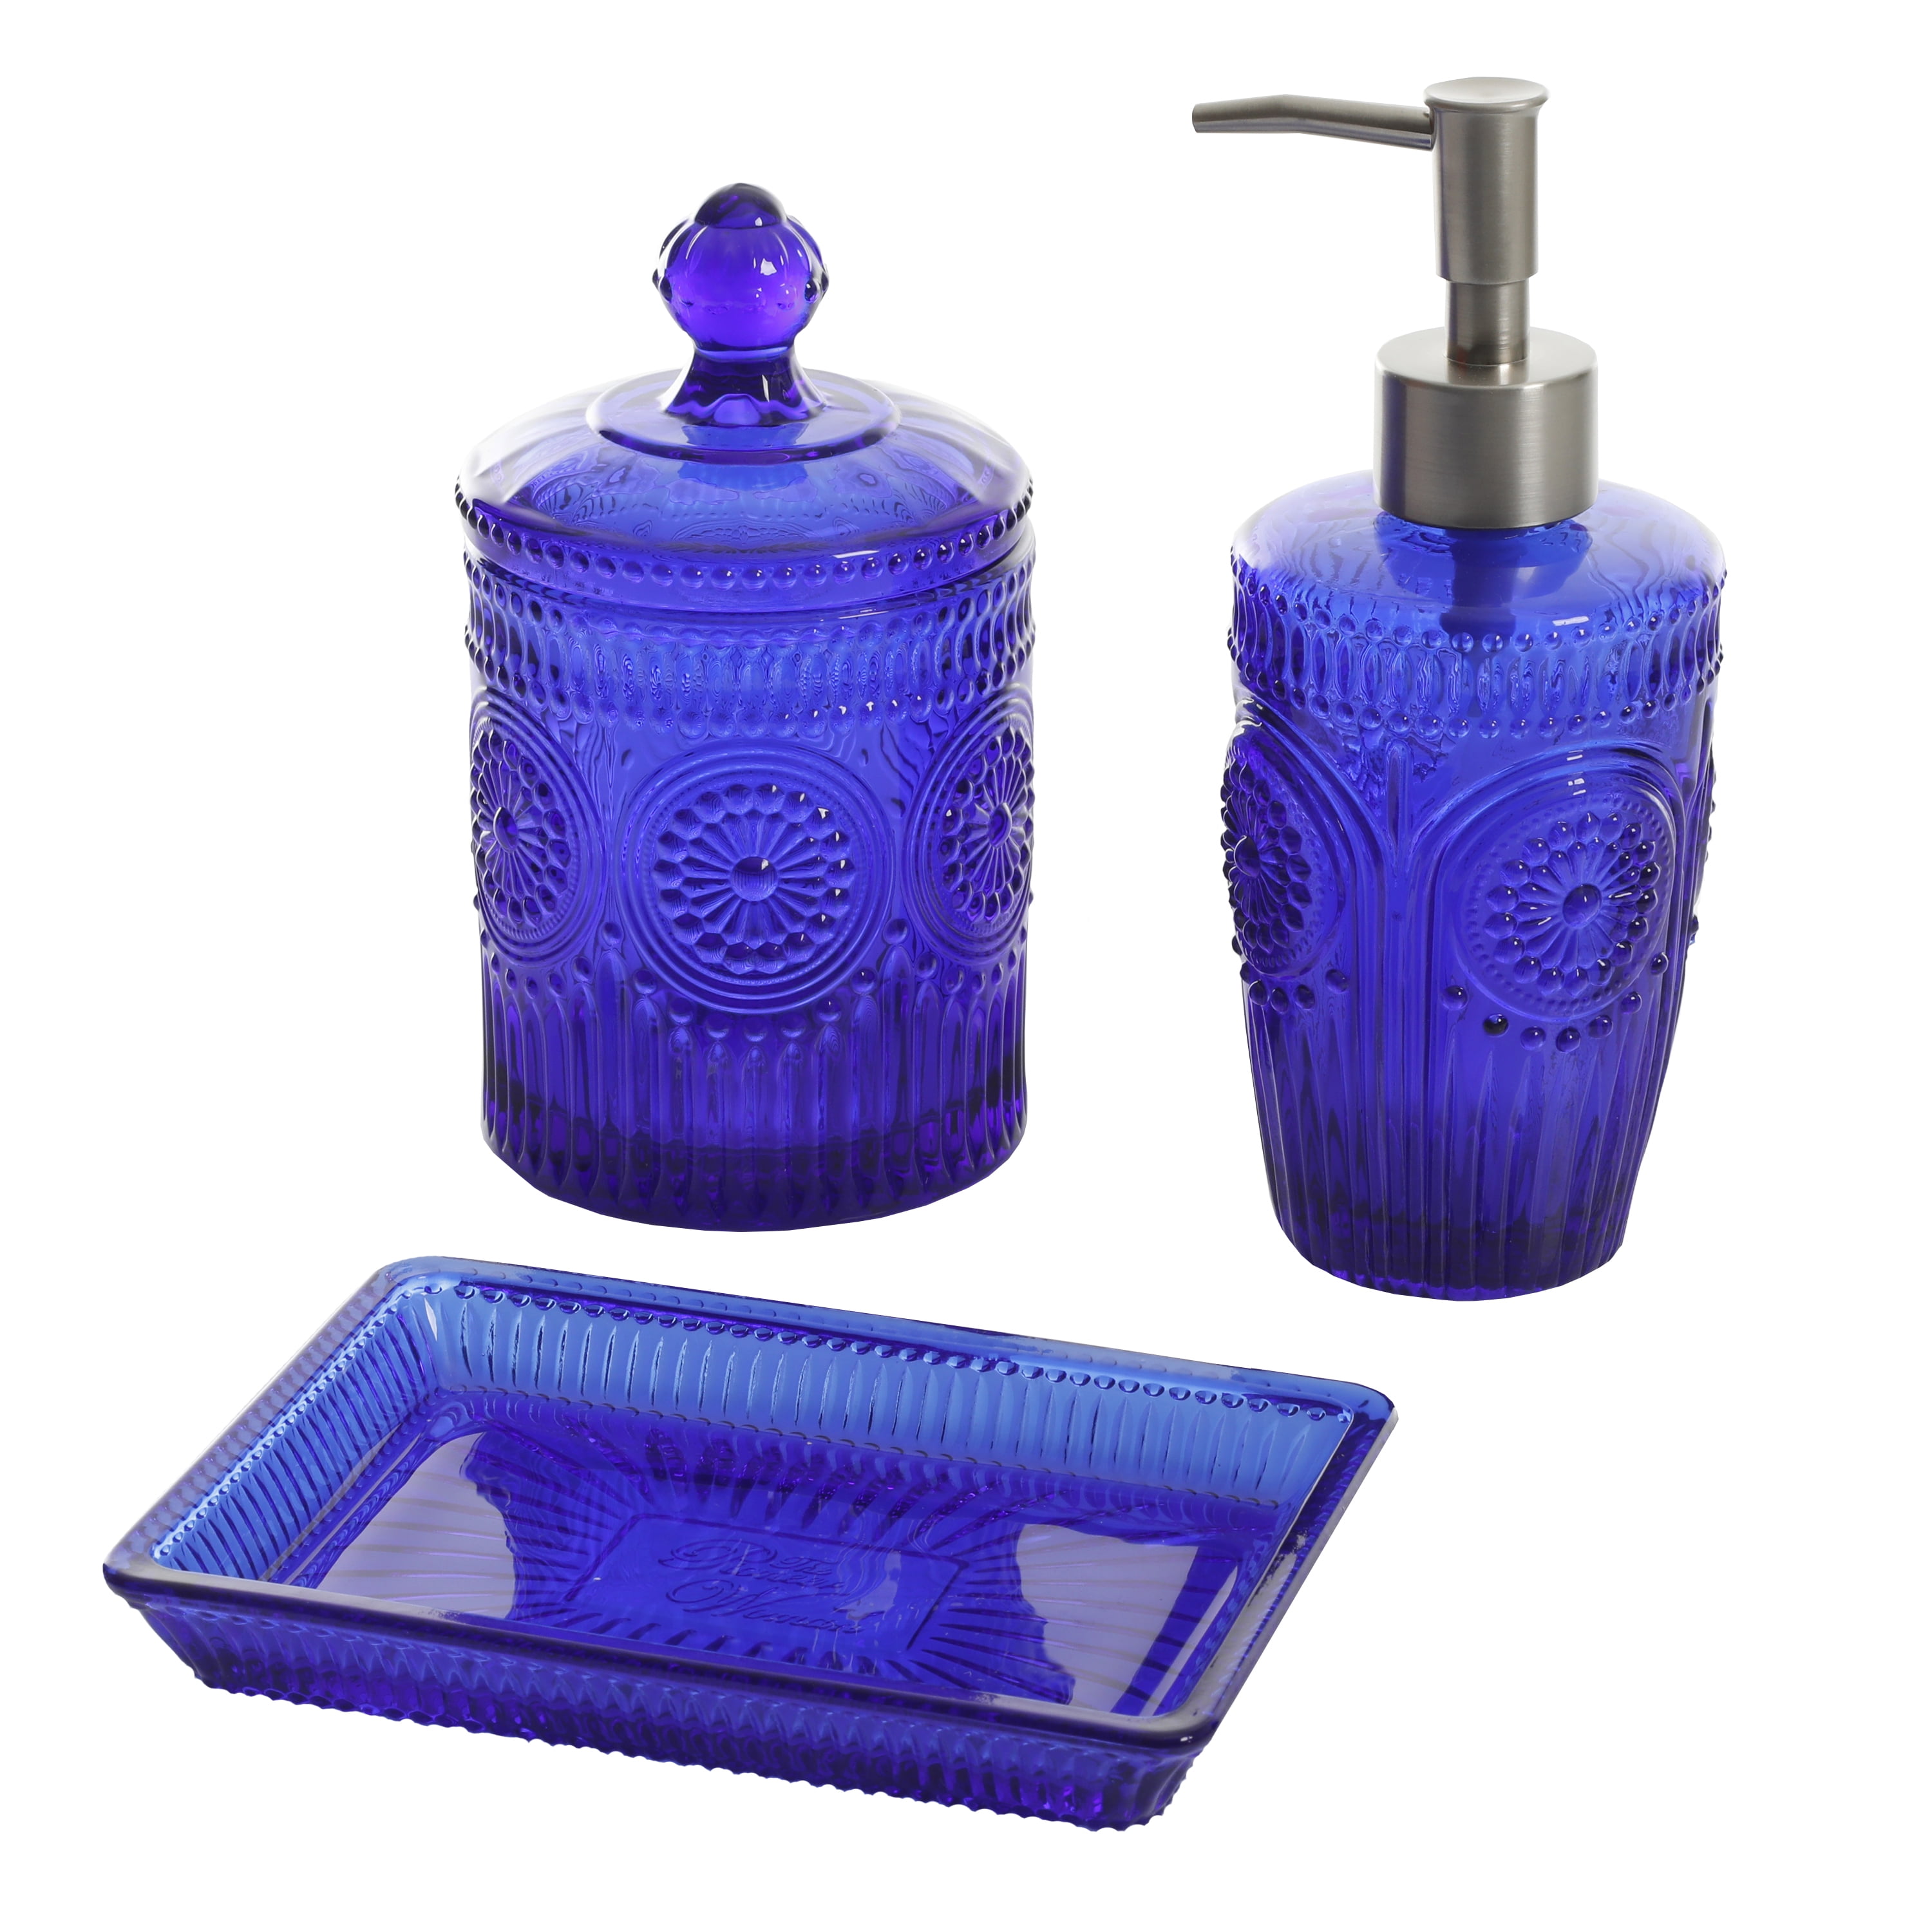 Teal 2 Piece Embossed Glass Bath Accessory Set, The Pioneer Woman Amelia, Size: Assorted(8.0 cm x 20.3 cm, 355 mL)TBH: 4.38 in W x 3.38 in D x 4.7 in